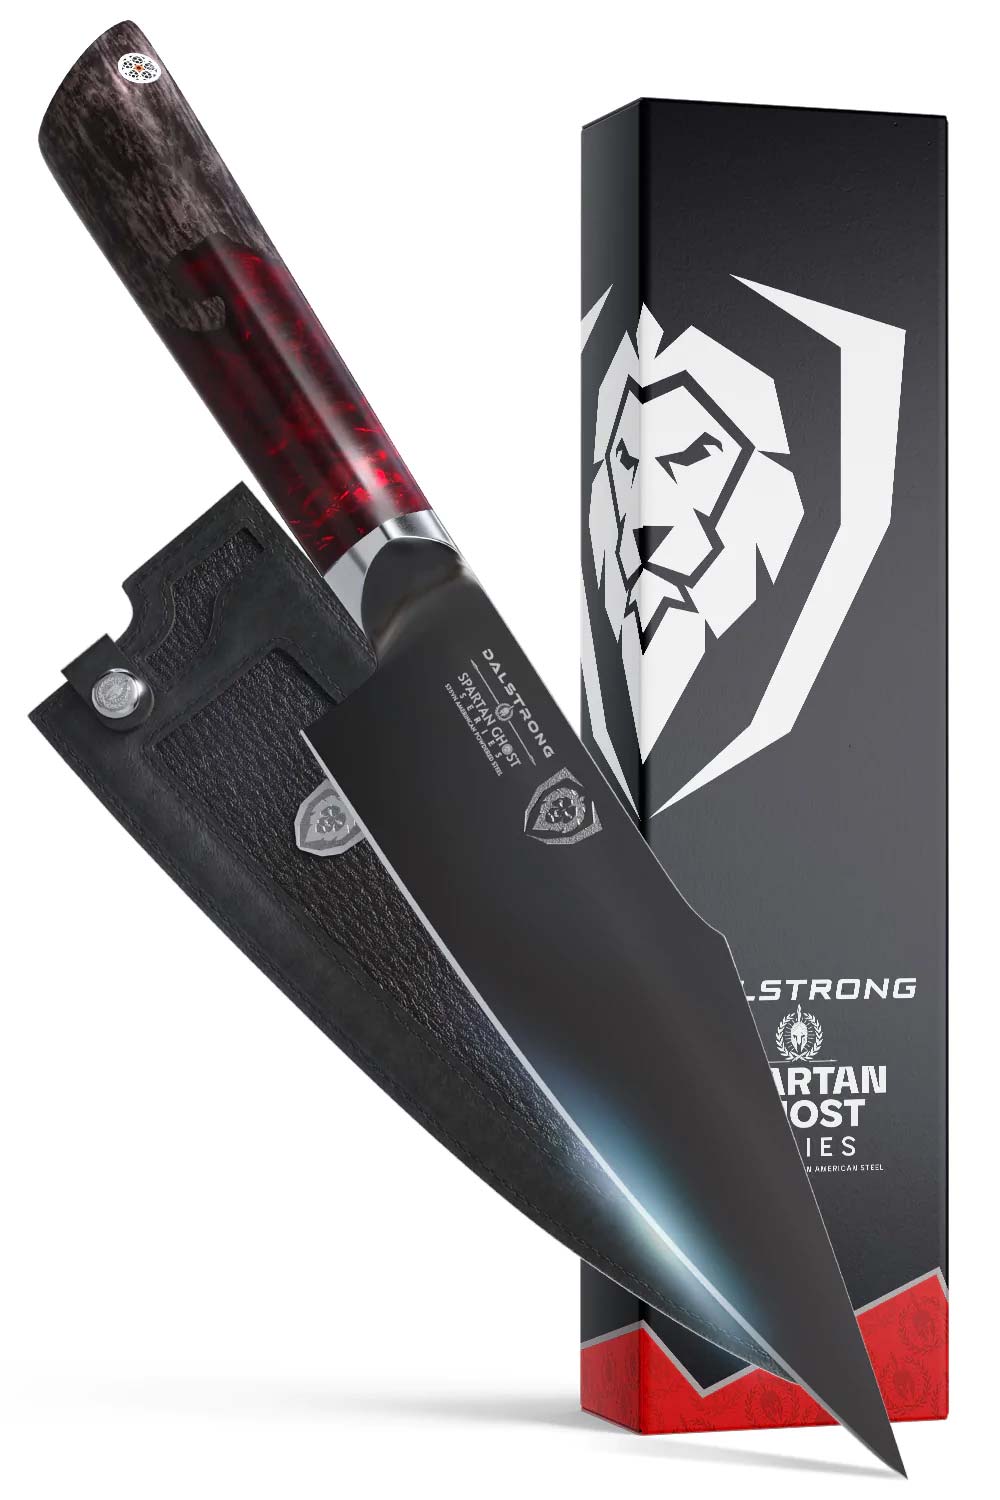 Dalstrong spartan ghost series 7 inch santoku knife in front of it's premium packaging.